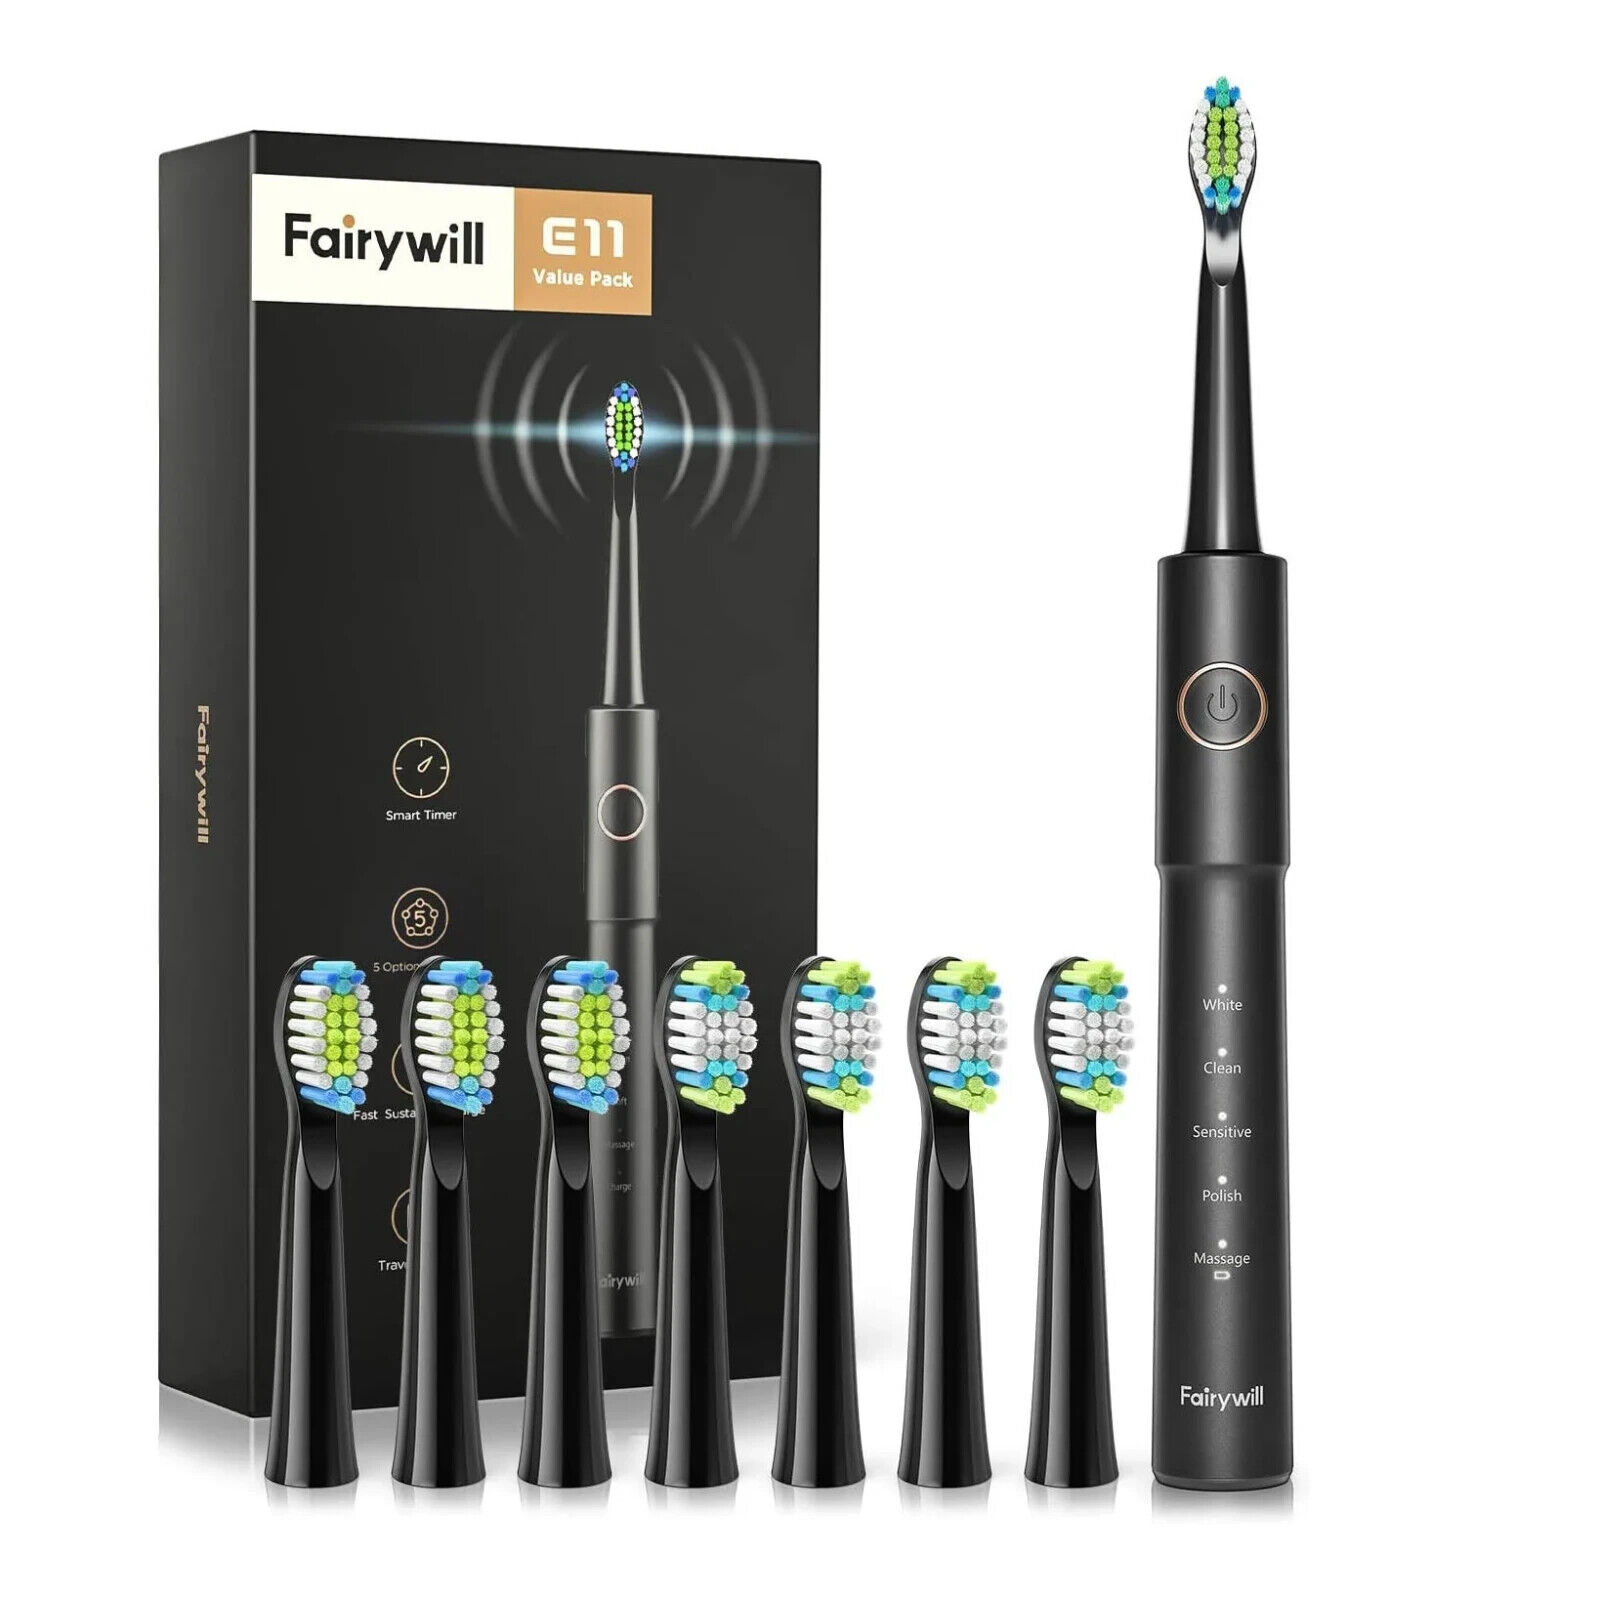 Fairywill E11 Sonic Electric Toothbrush with 5 Modes for Adults, Black